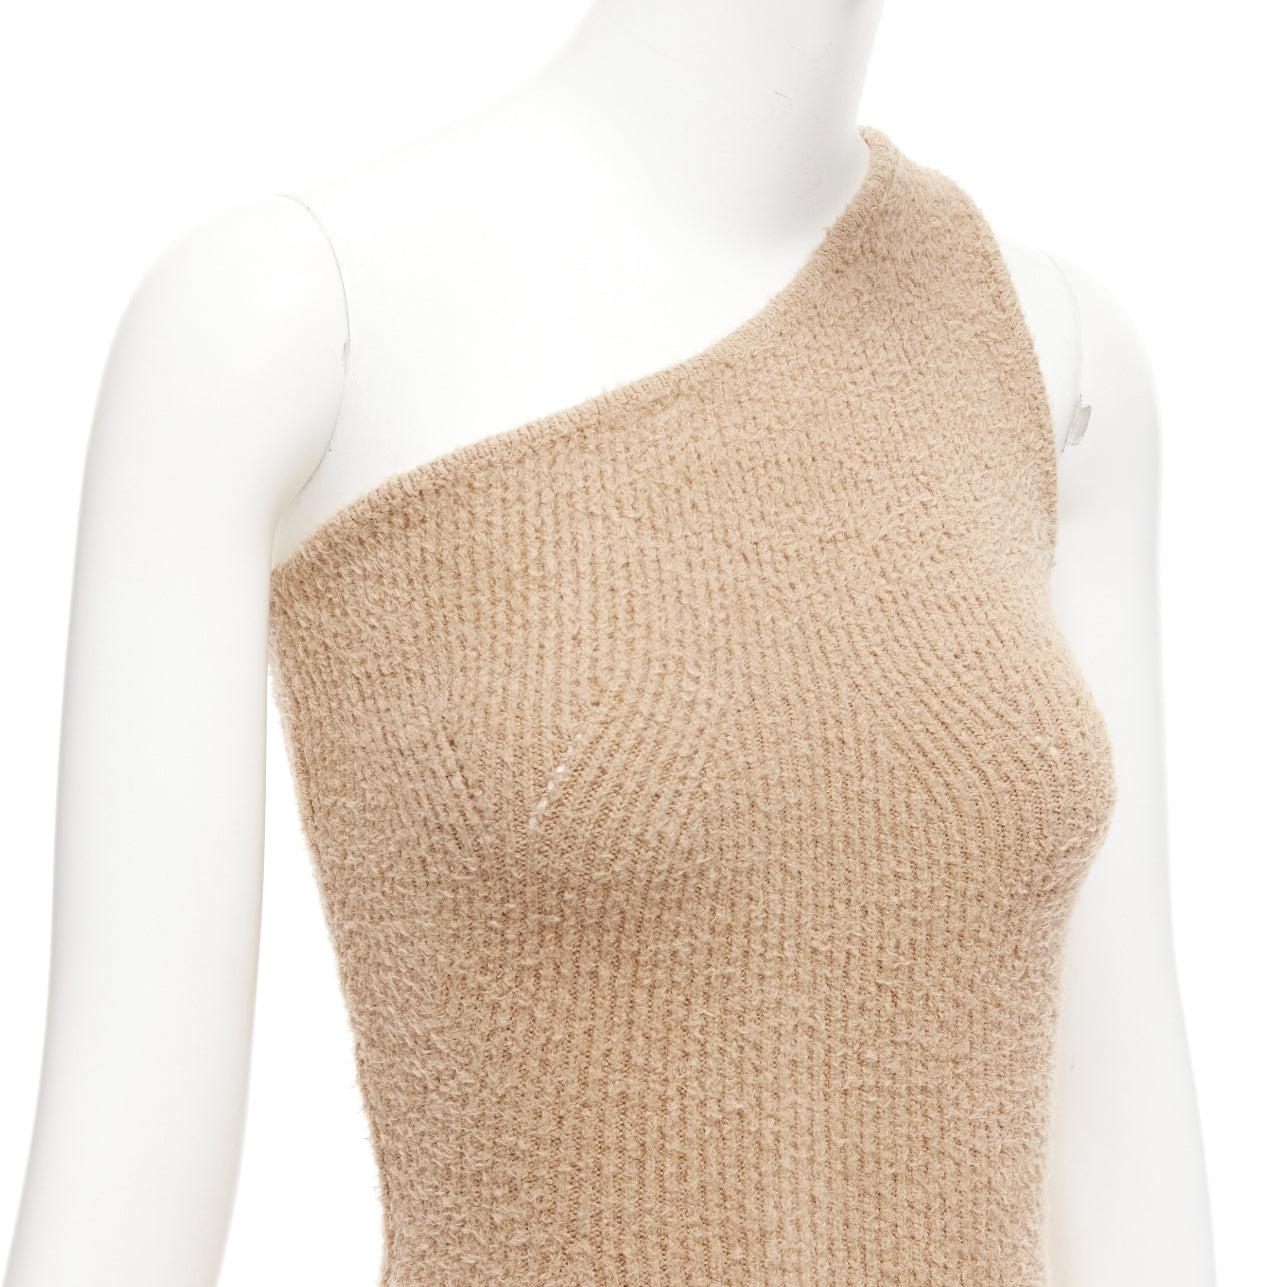 WARDROBE NYC HAILEY BIEBER HB tan fuzzy knit cotton one shoulder mini dress S
Reference: LNKO/A02391
Brand: Wardrobe NYC
Collection: WARDROBE.NYC x Hailey Bieber collaboration
Material: Cotton, Blend
Color: Tan Brown
Pattern: Solid
Closure: Slip